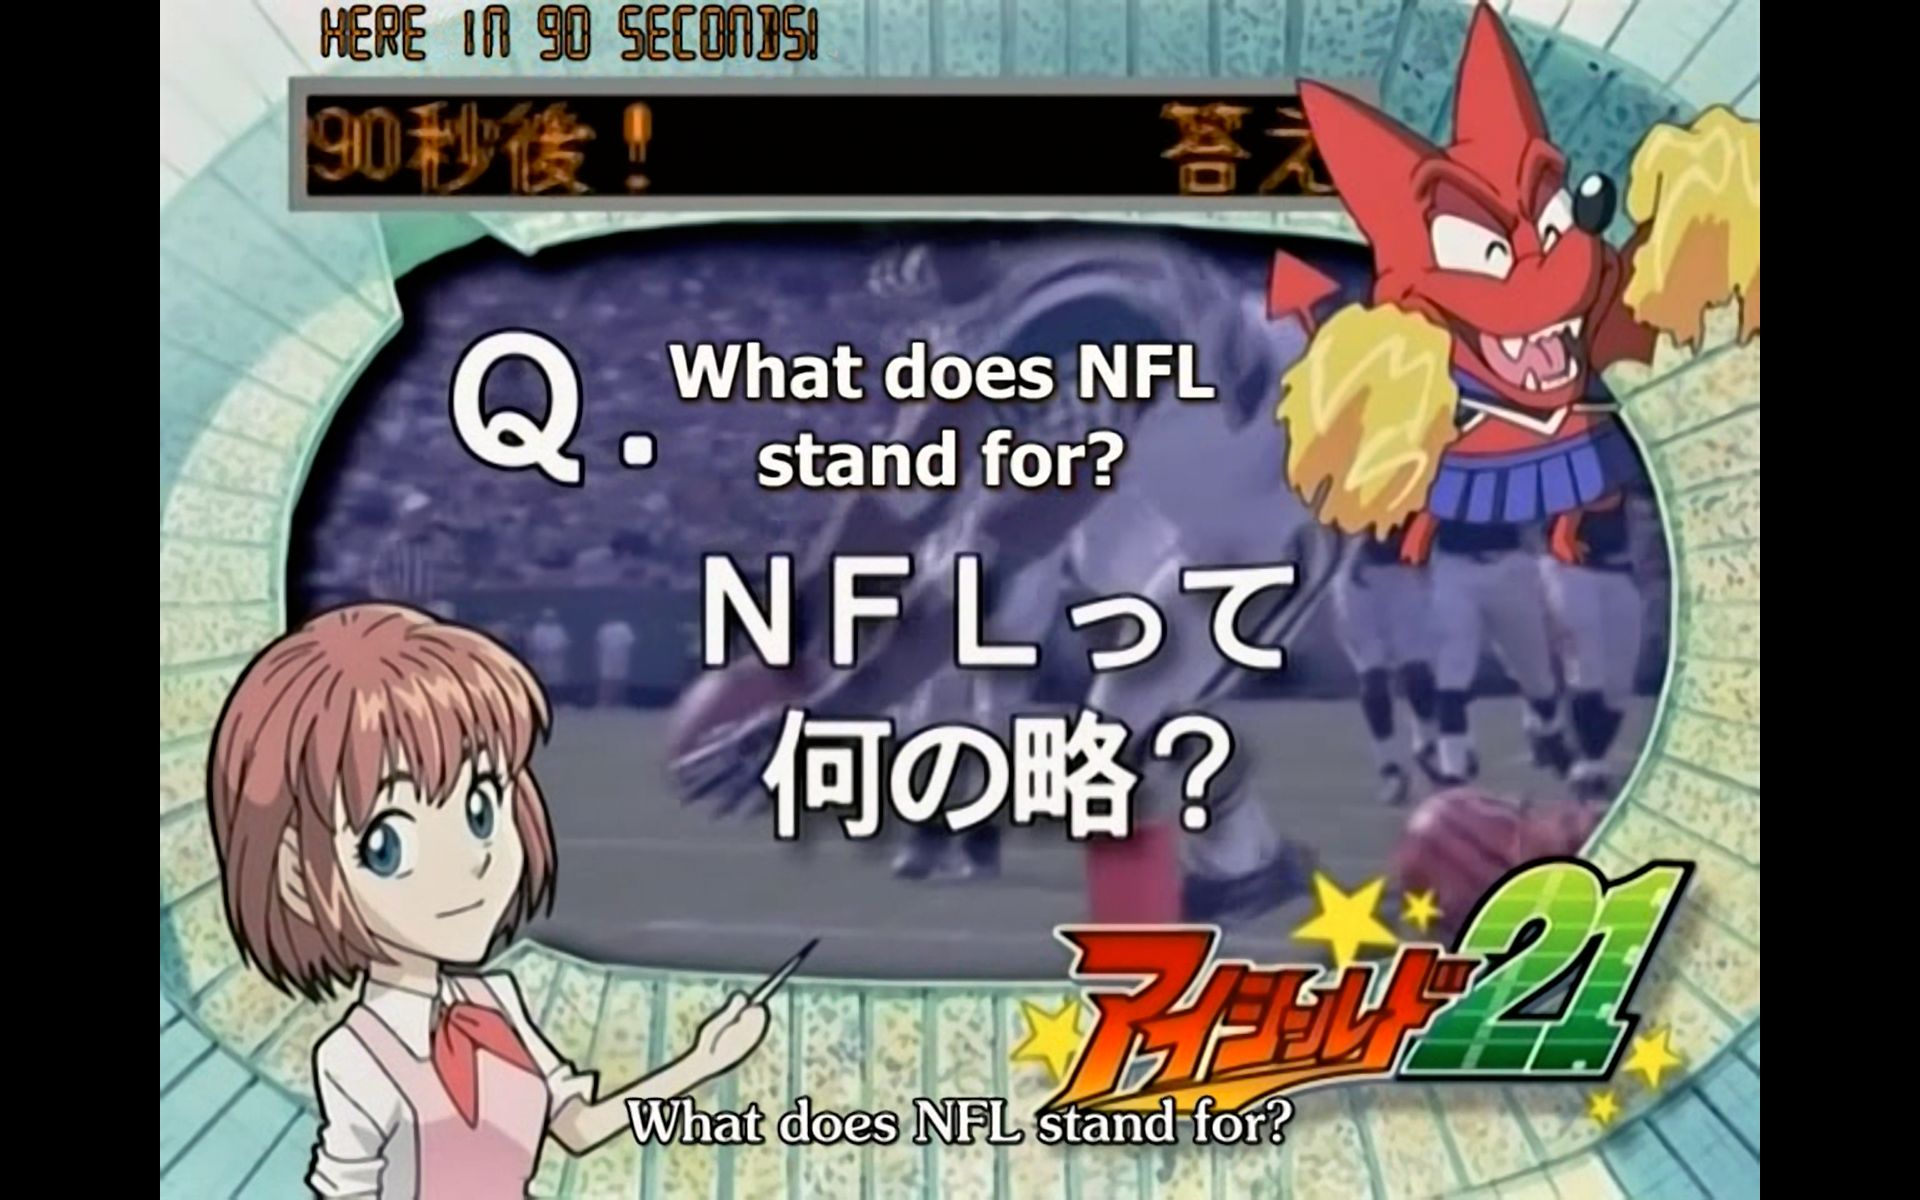 Some asinine questions too during the eyecatch section.